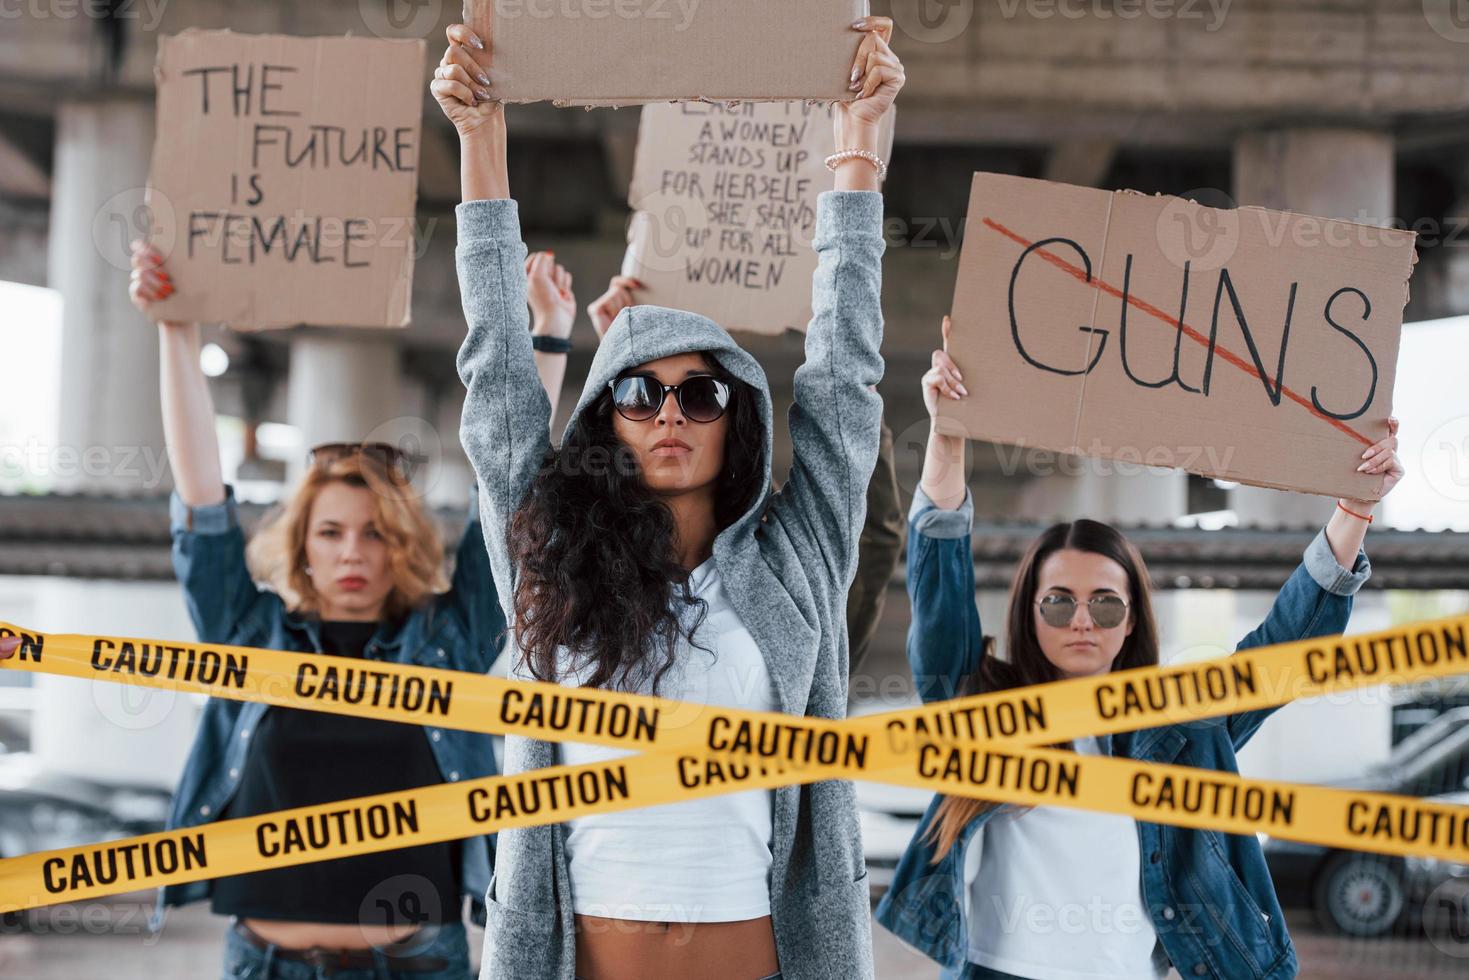 Attention needed. Group of feminist women have protest for their rights outdoors photo